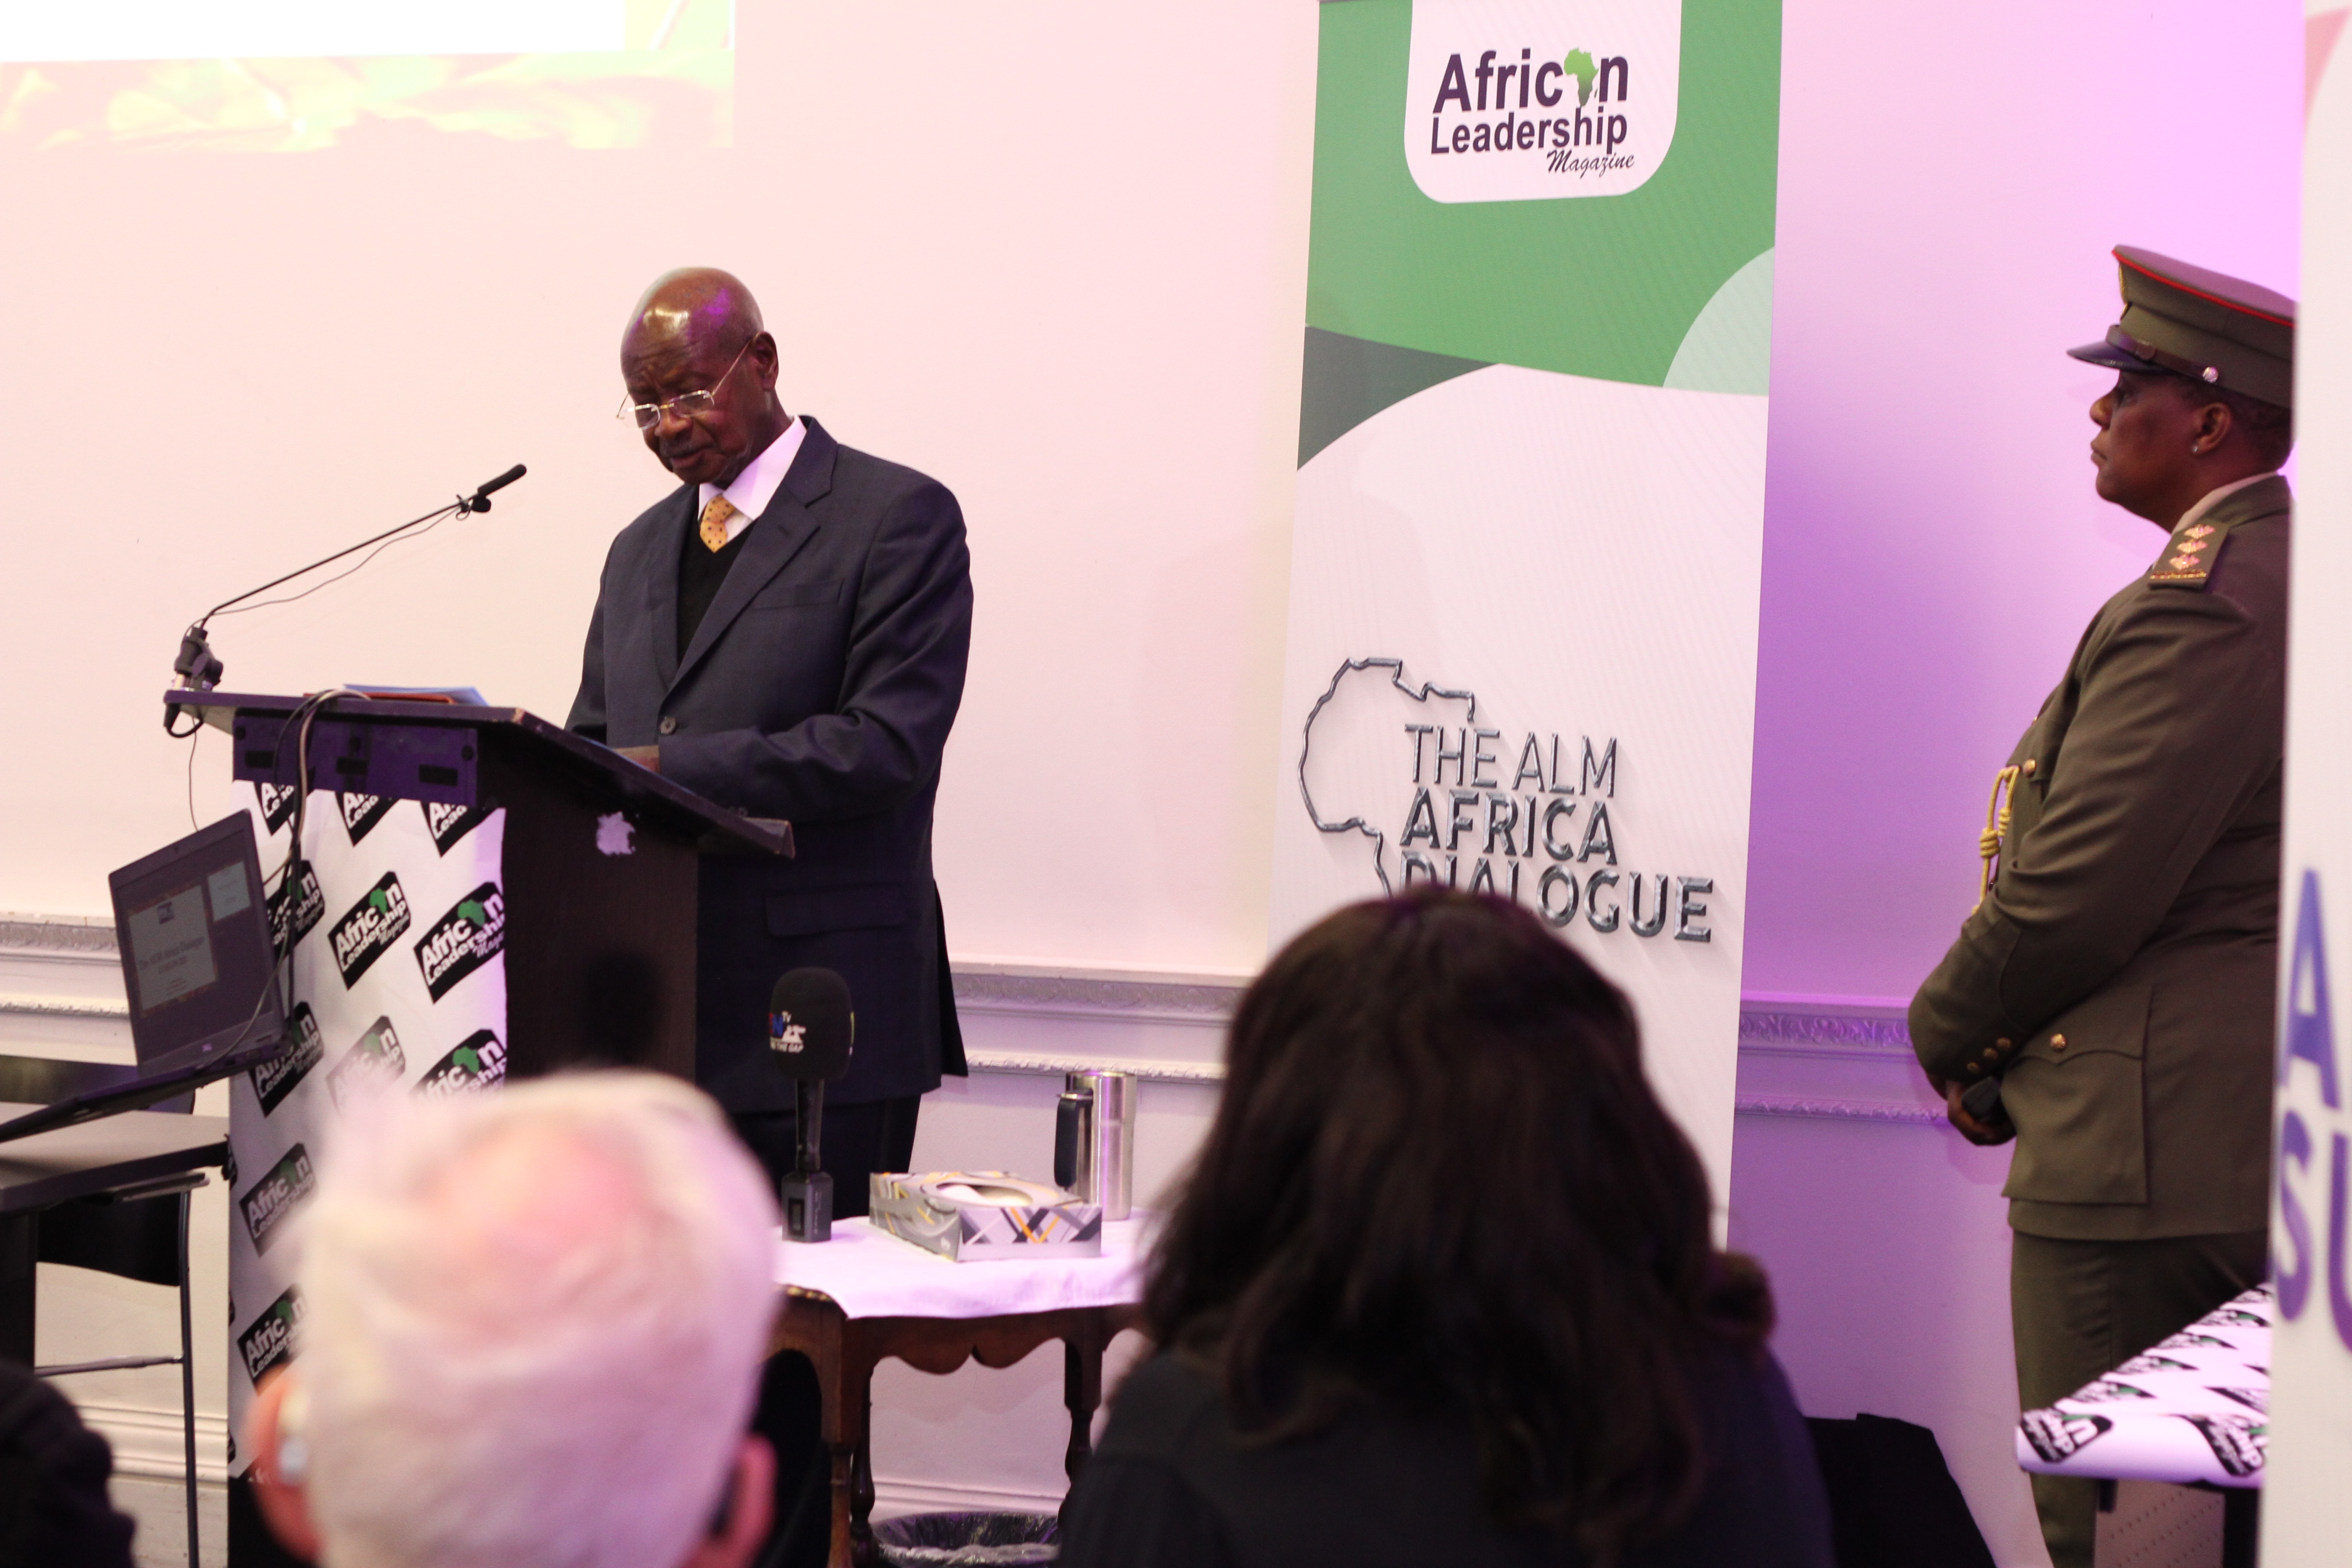 The private sector as Key to Africa’s Development re-echoed at the ALM Africa Dialogue London